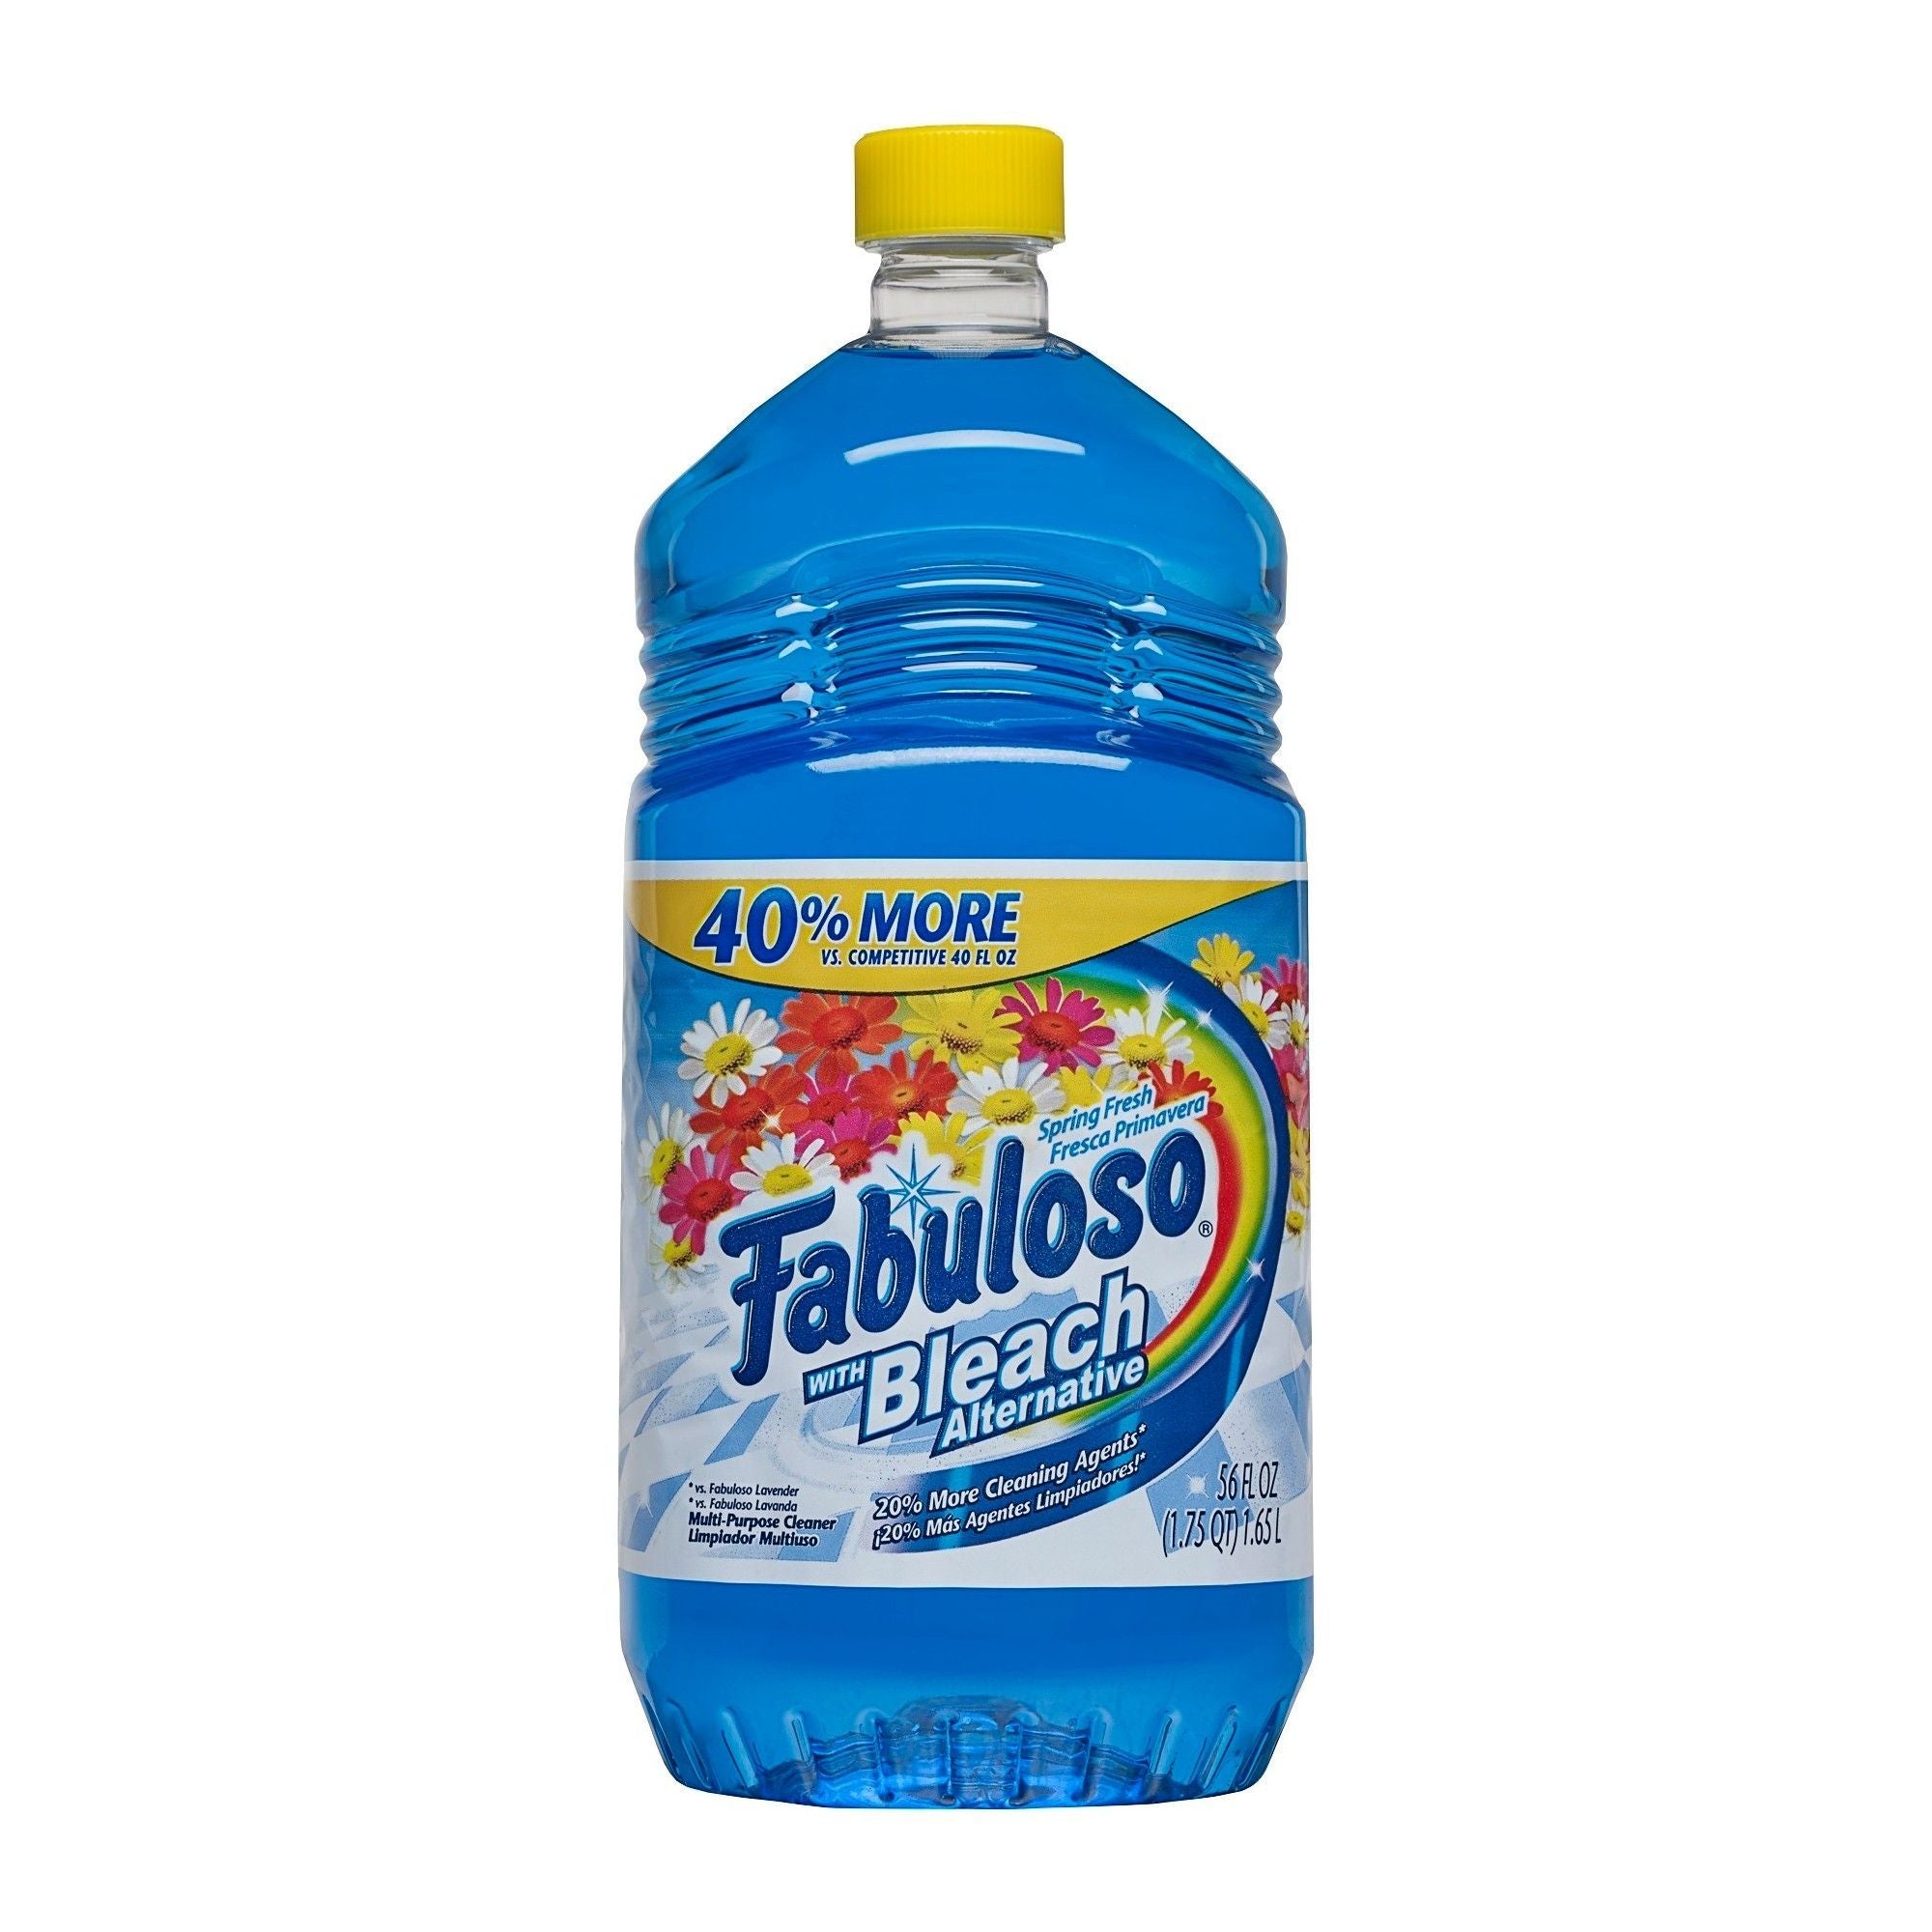 Fabuloso - Multi-Purpose Cleaner w/Bleach, Spring Fresh Scent, 56 Fluid Ounce - Case of 6